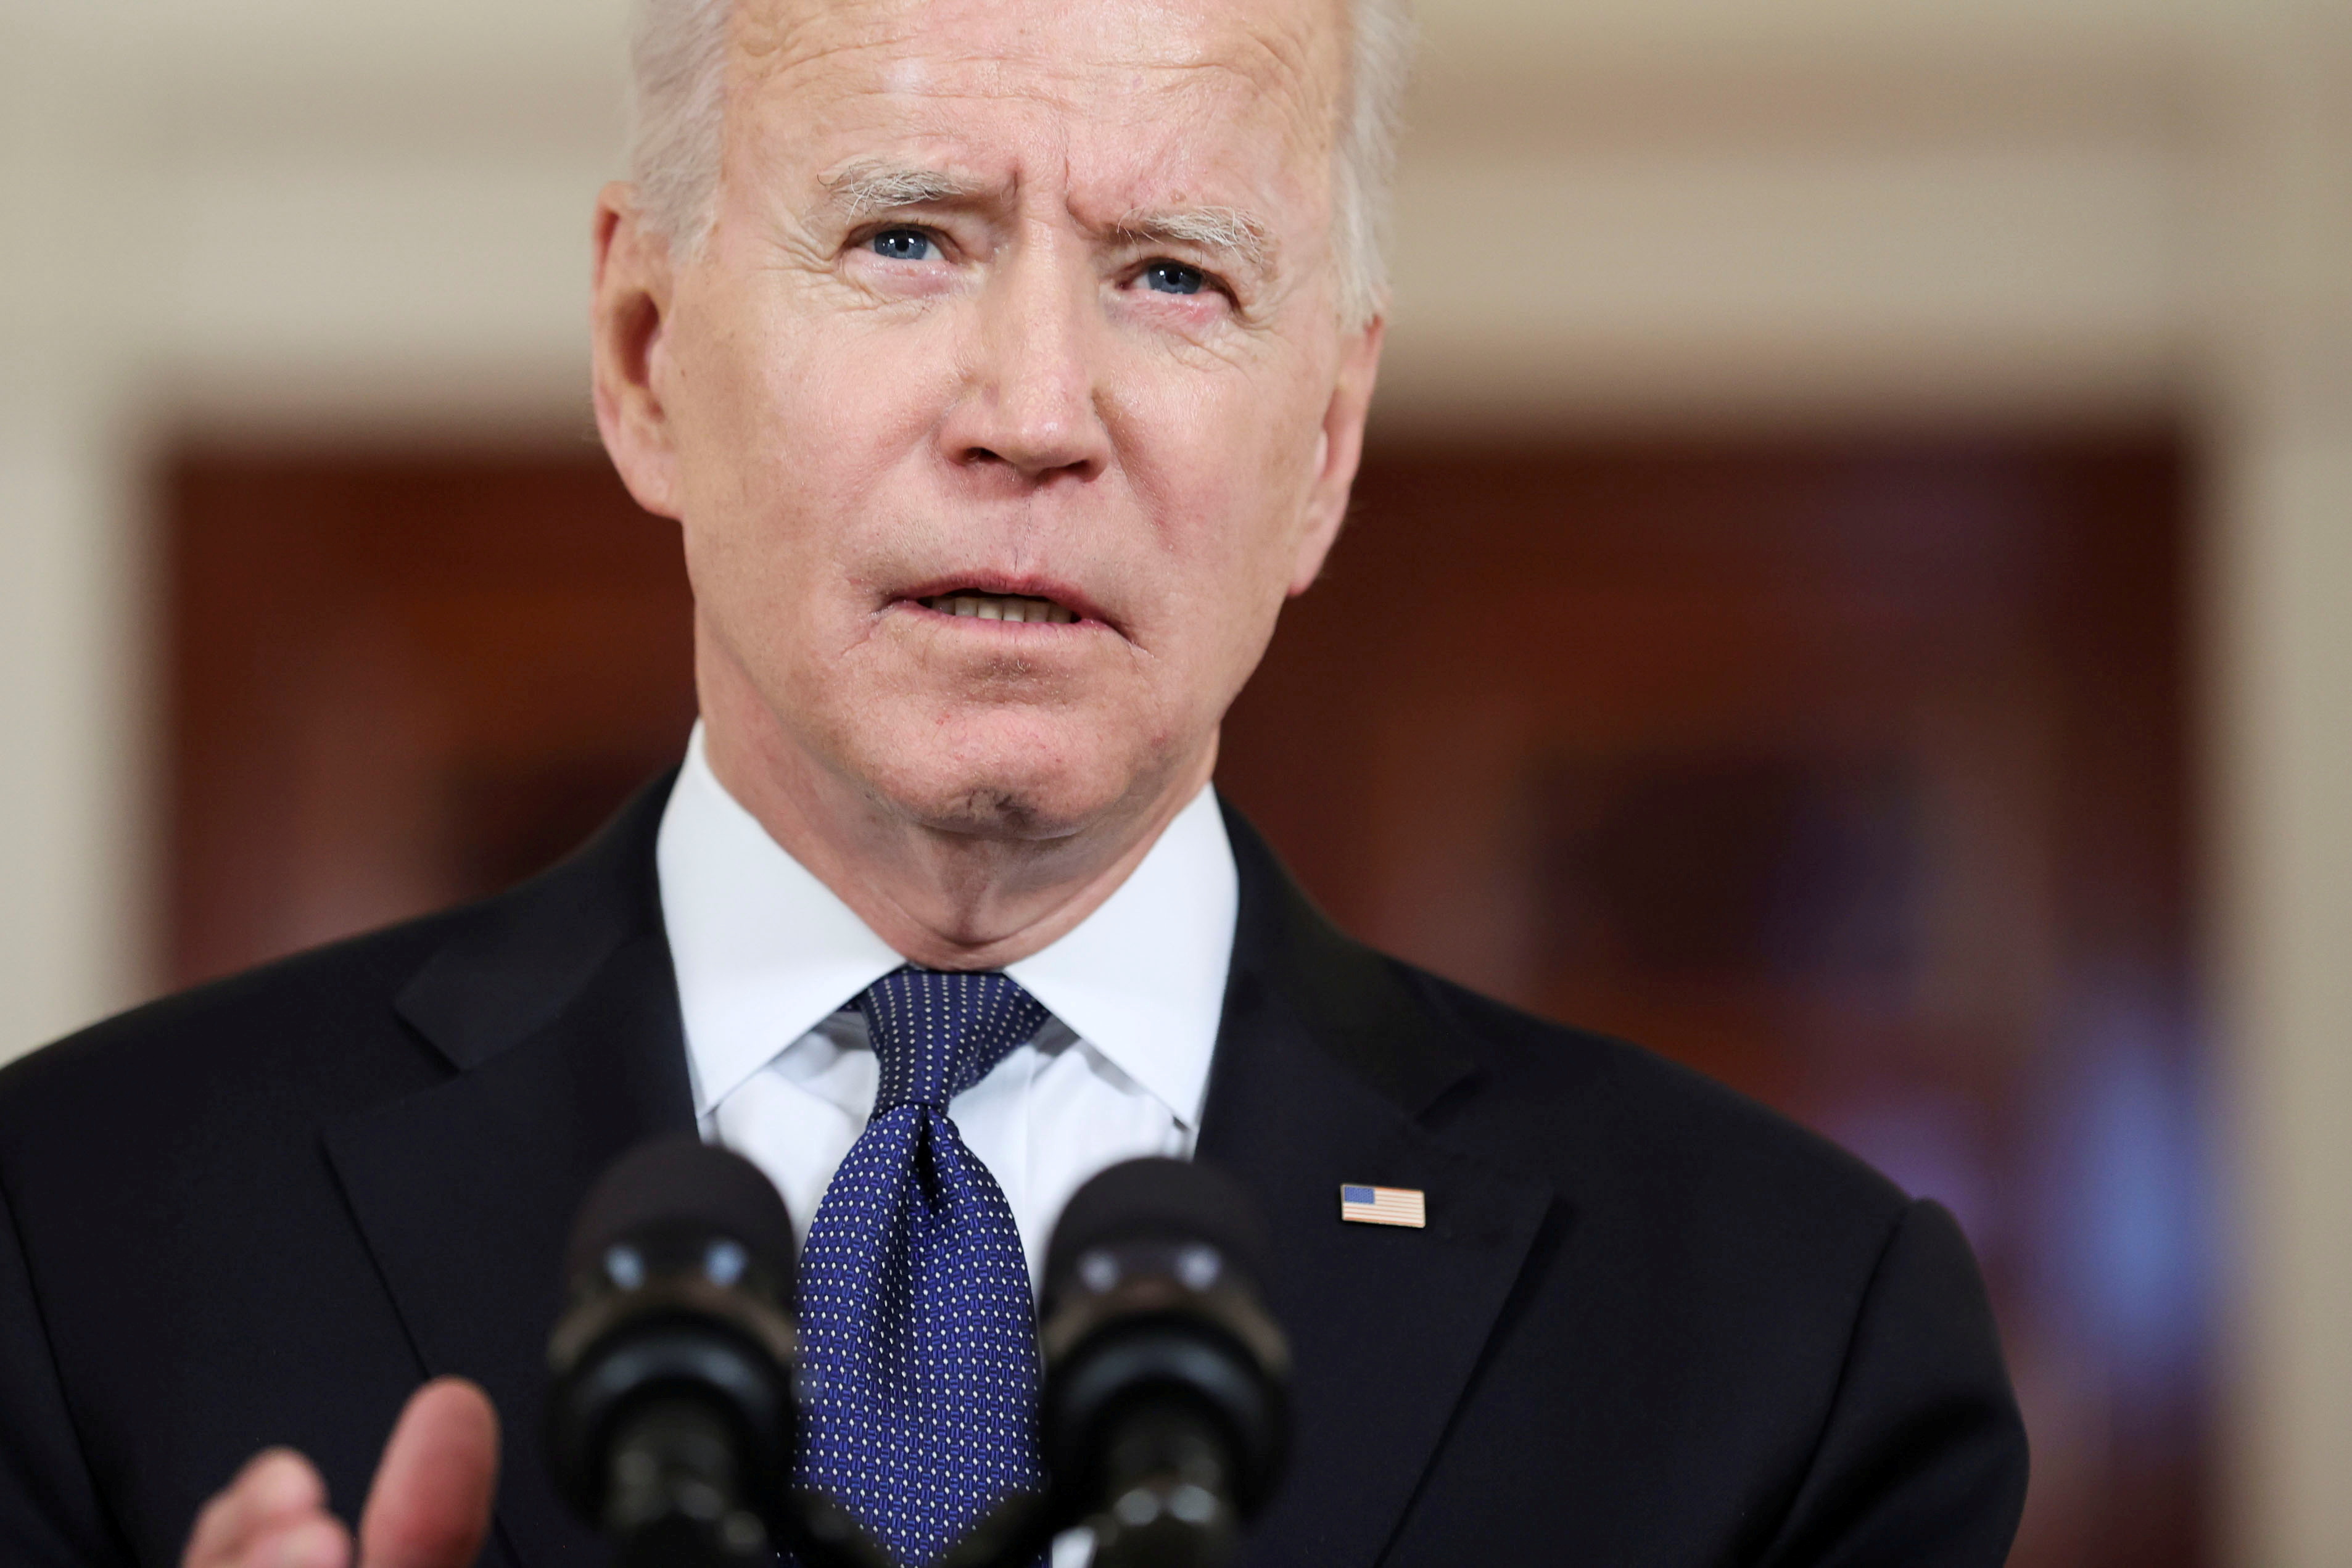 FILE PHOTO: U.S. President Joe Biden delivers remarks during a brief appearance in the Cross Hall at the White House in Washington, U.S., May 20, 2021. REUTERS/Jonathan Ernst/File Photo